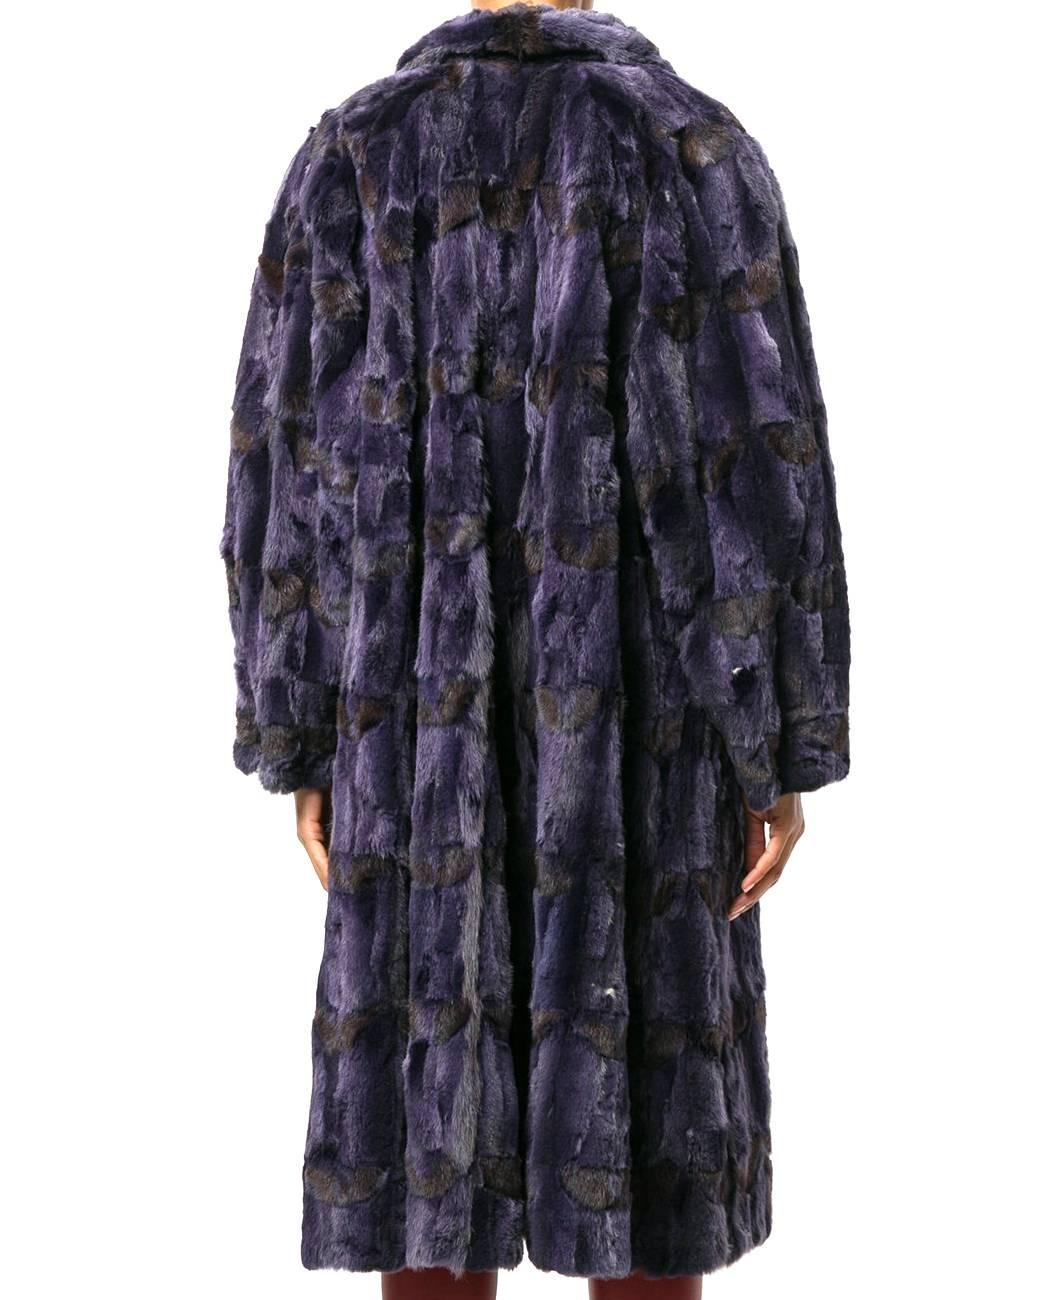 Marvelous Fendi purple fox fur, mink fur and silk long coat with shades of dark brown. It features a flared shape, long sleeves a closure with big logoed plastic button on the front and a hook. The item is vintage, it was produced in the 90s and is